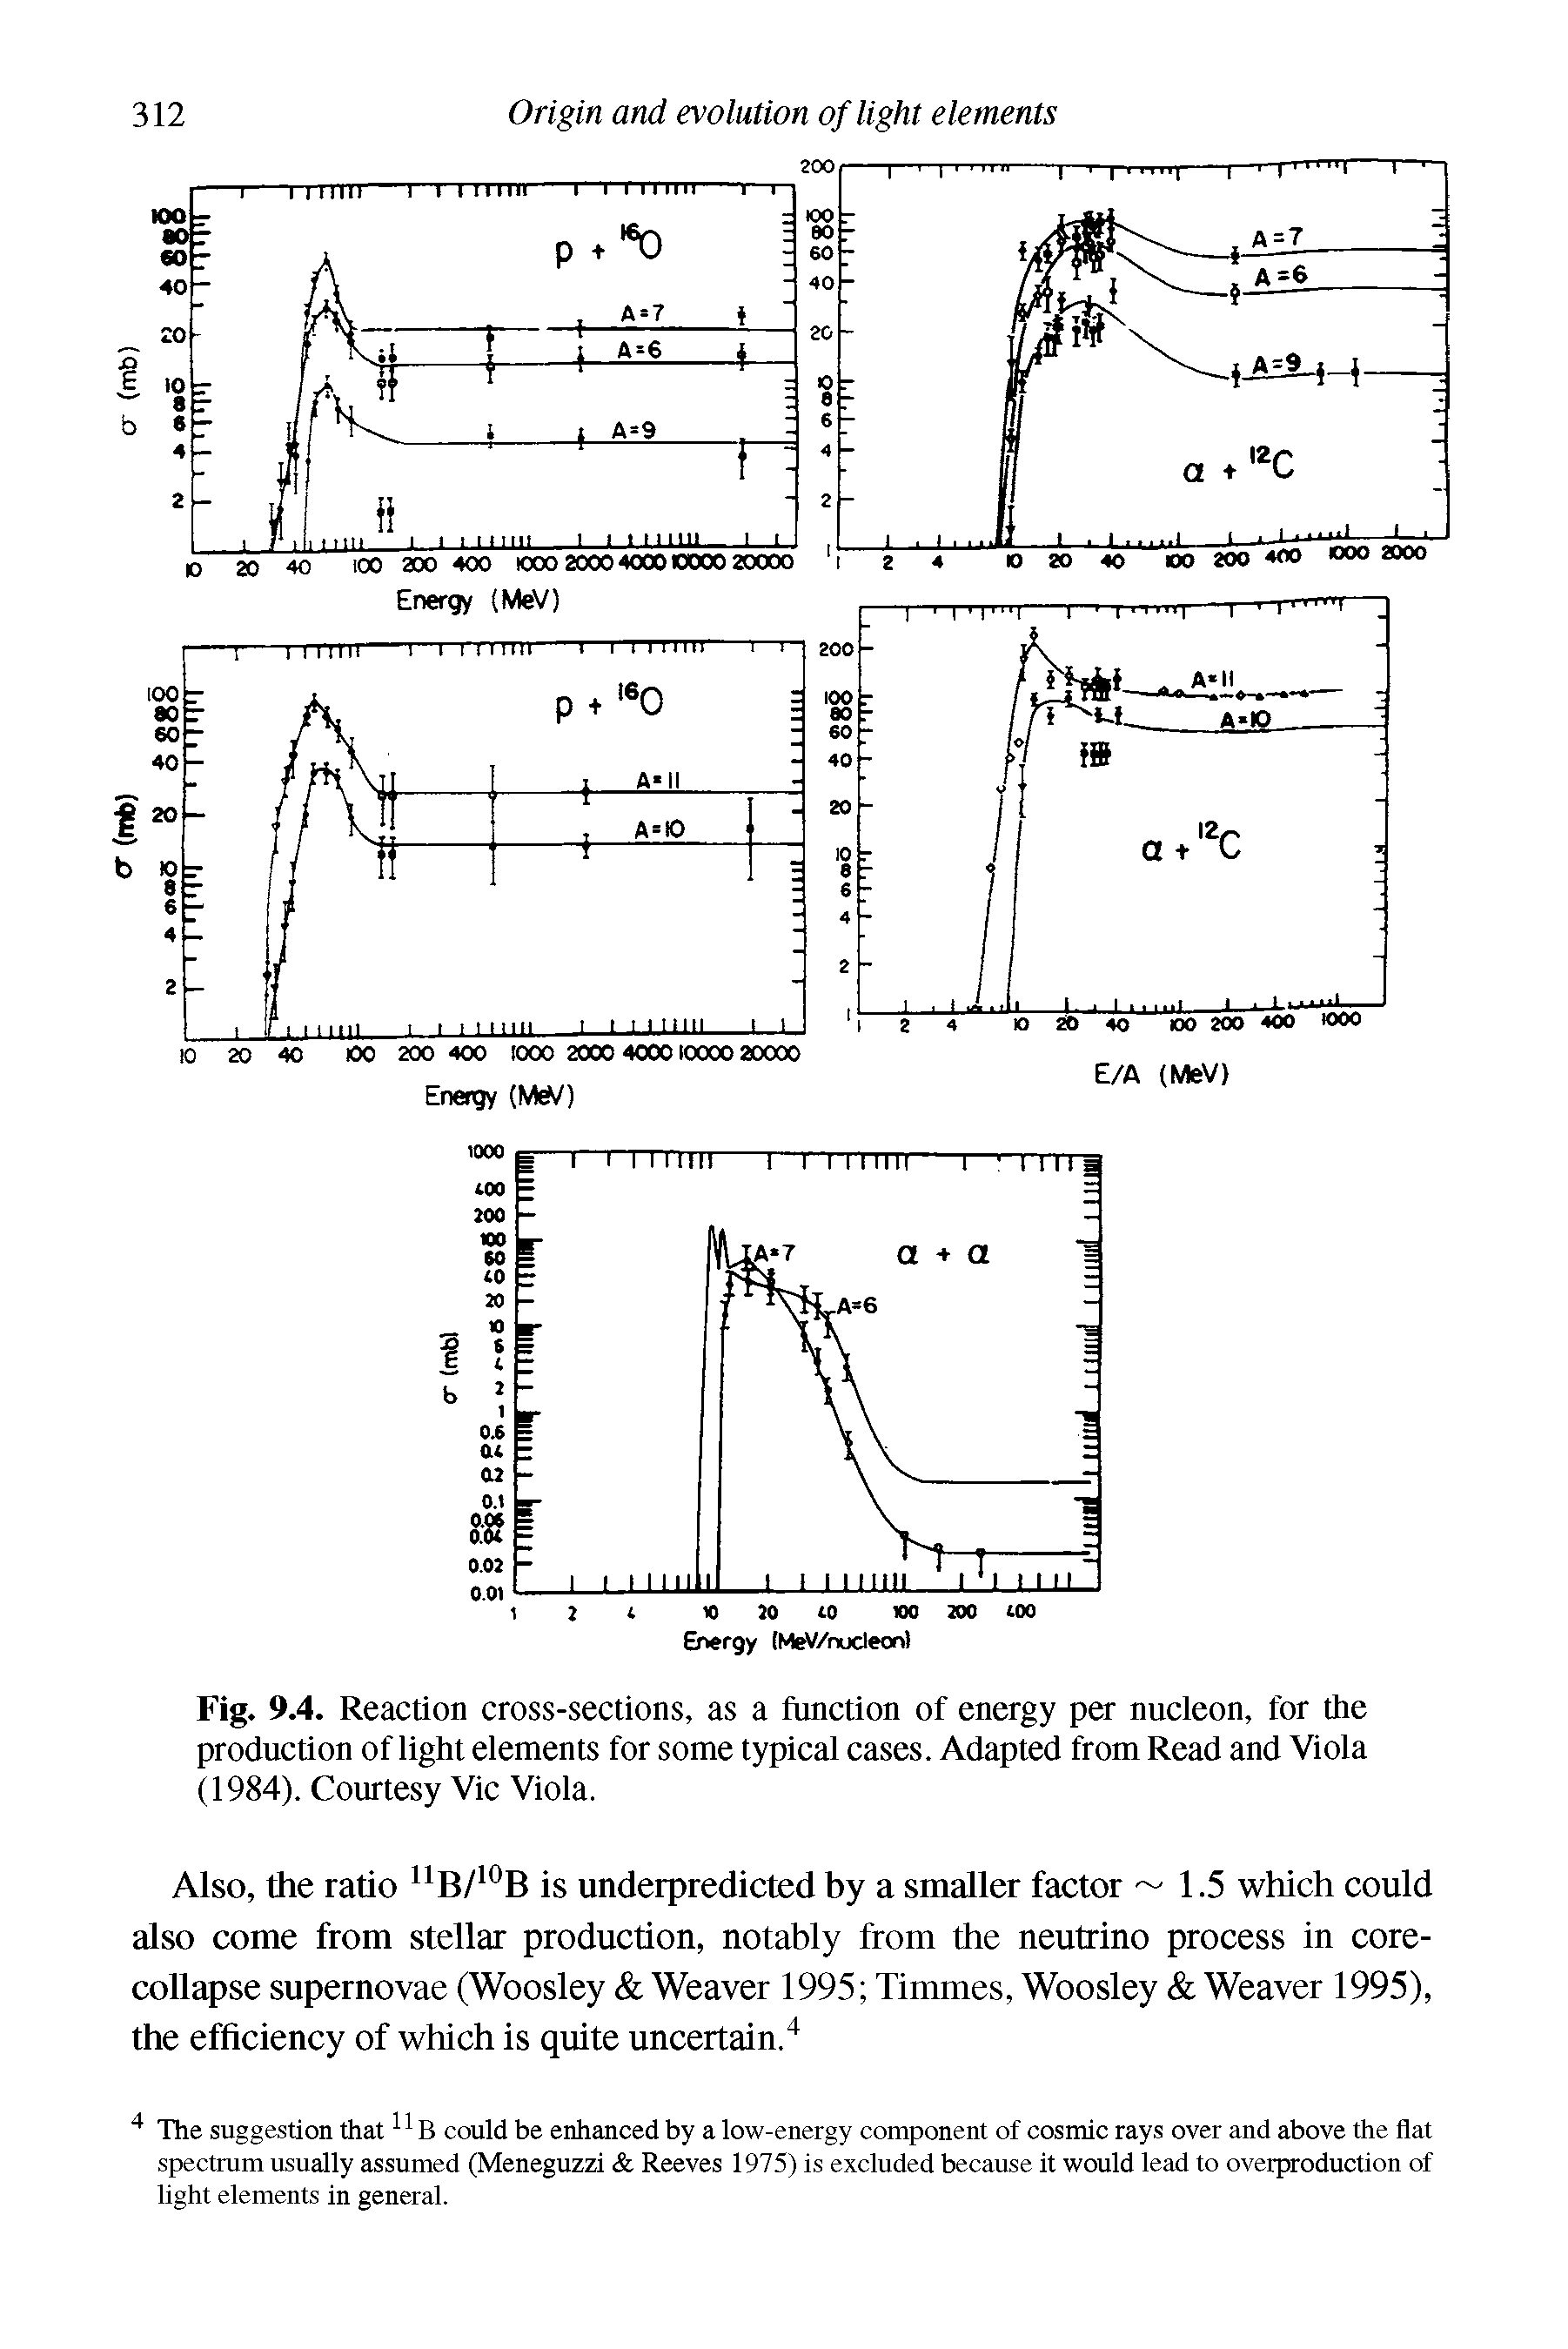 Fig. 9.4. Reaction cross-sections, as a function of energy per nucleon, for the production of light elements for some typical cases. Adapted from Read and Viola (1984). Courtesy Vic Viola.